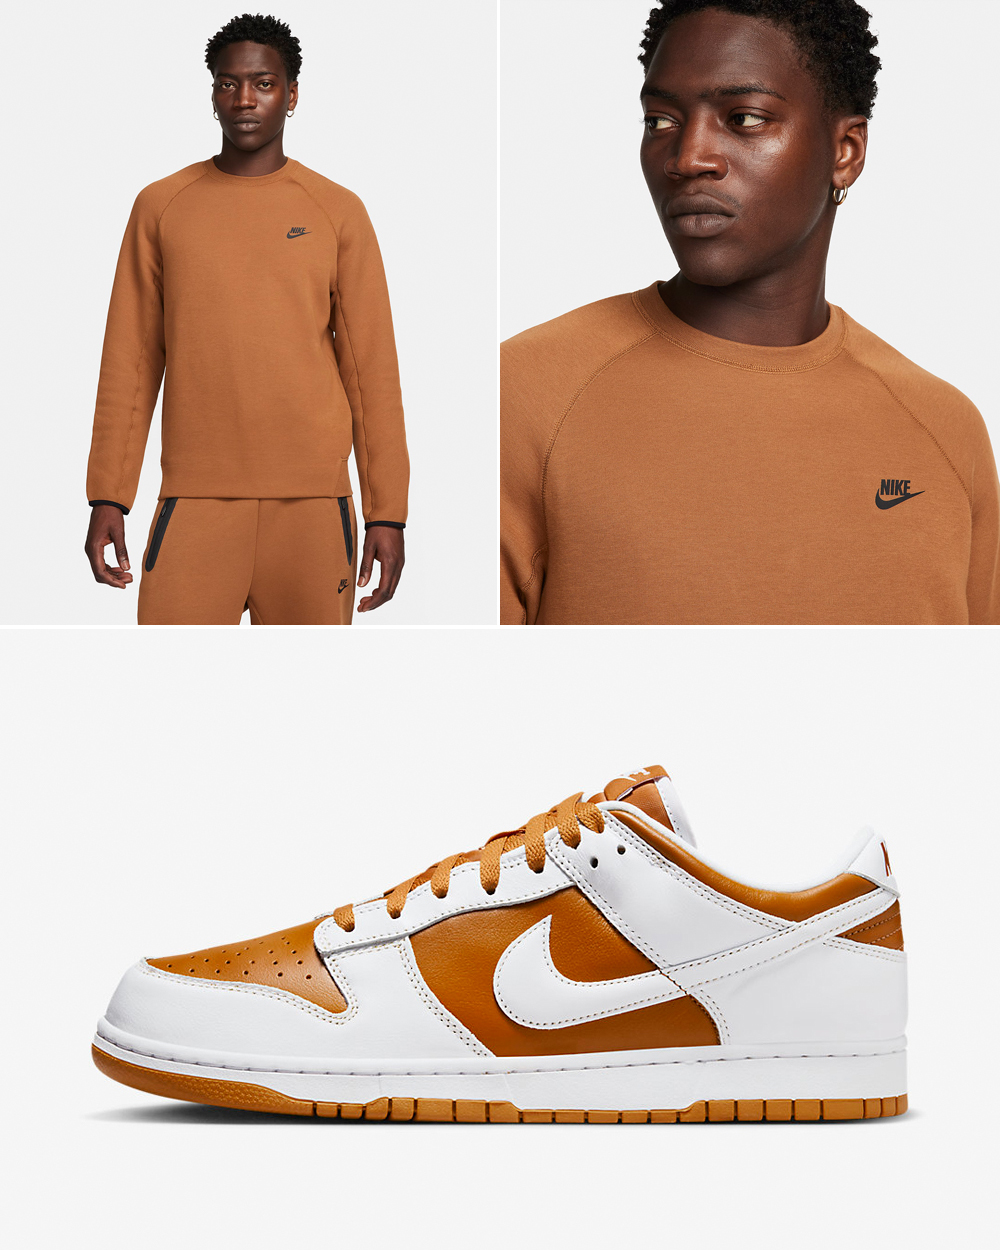 Nike-Dunk-Low-Reverse-Curry-Sweatshirt-Matching-Outfit